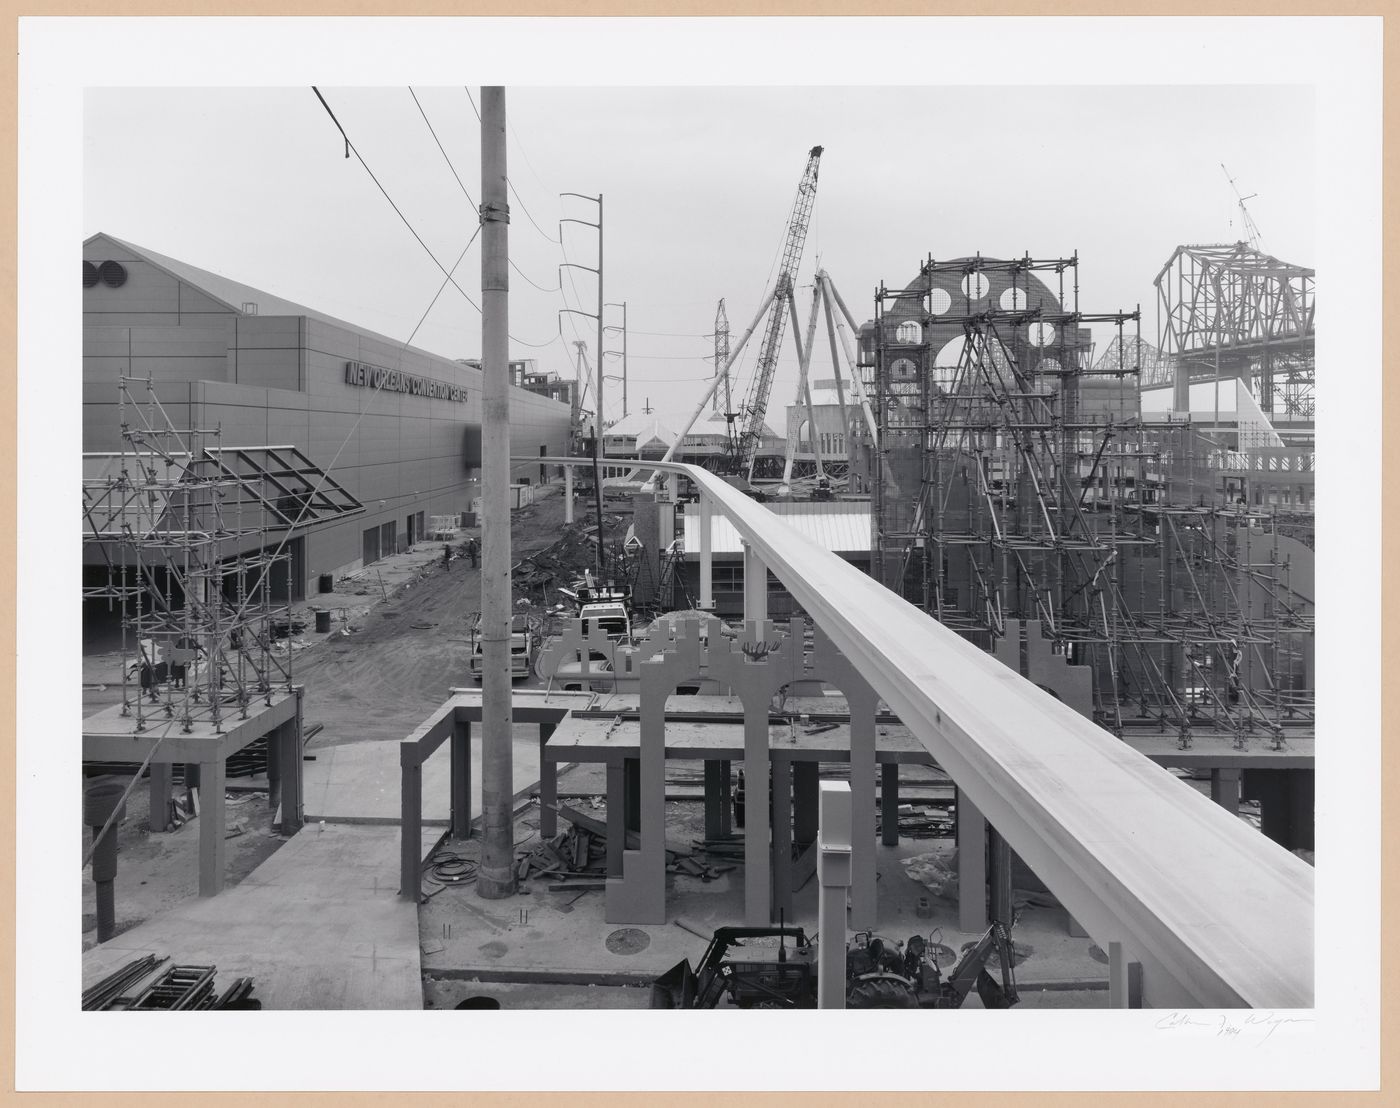 View of the Wonderwall under construction and Monorail track with New Orleans Convention Center (now George Moscone Convention Center) on the left, Louisiana World Exposition, New Orleans, United States